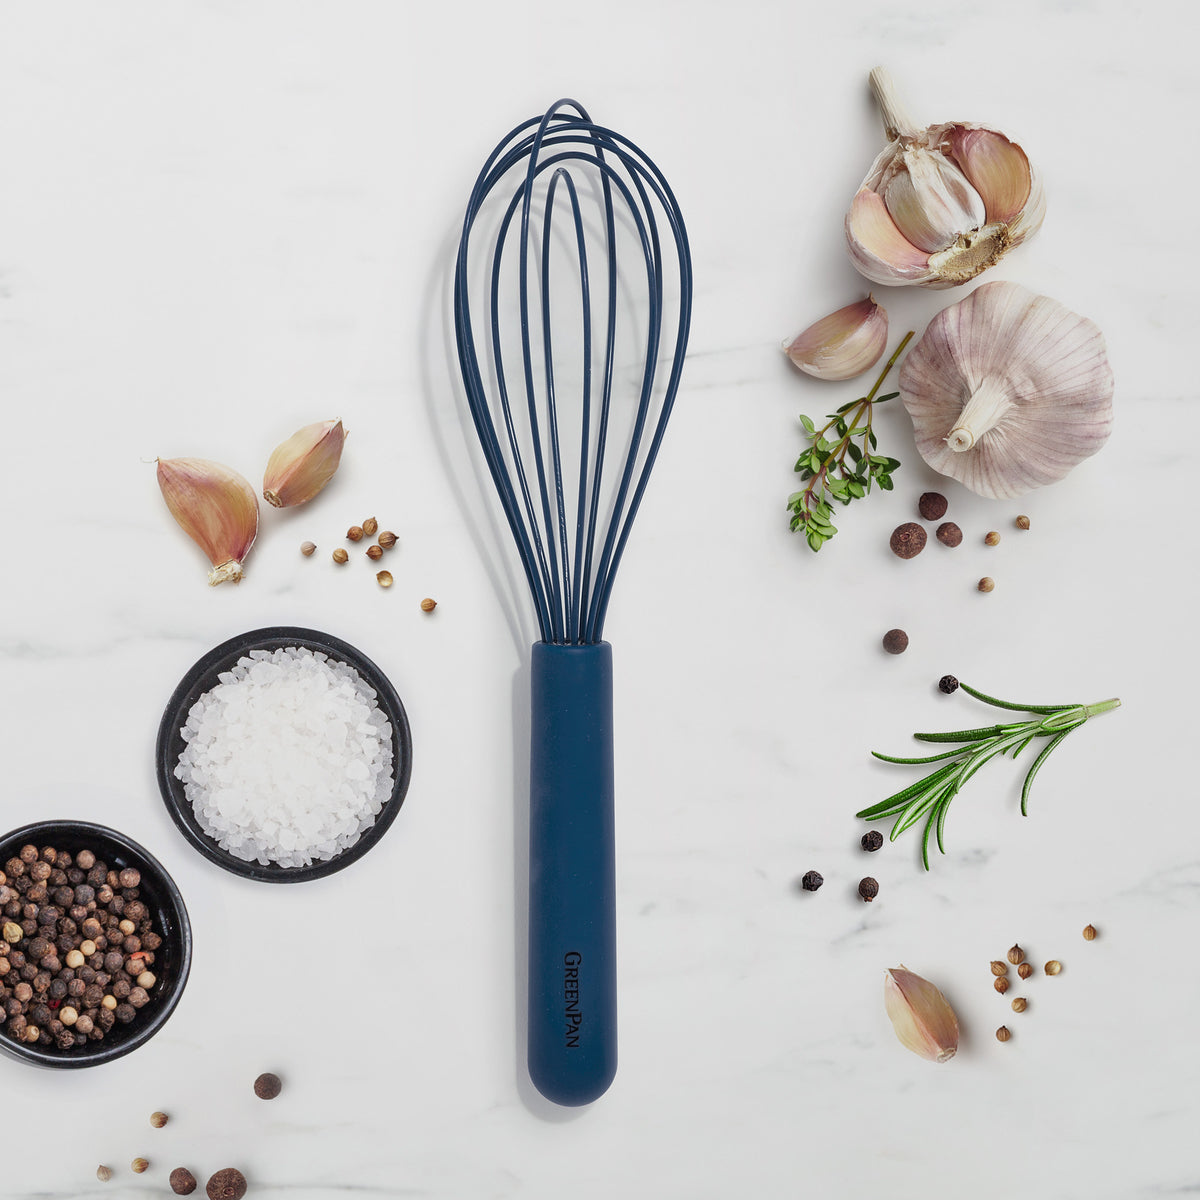 Healthy Non-Toxic PFAS Free Cookware - Platinum Silicone Whisk by GreenPan